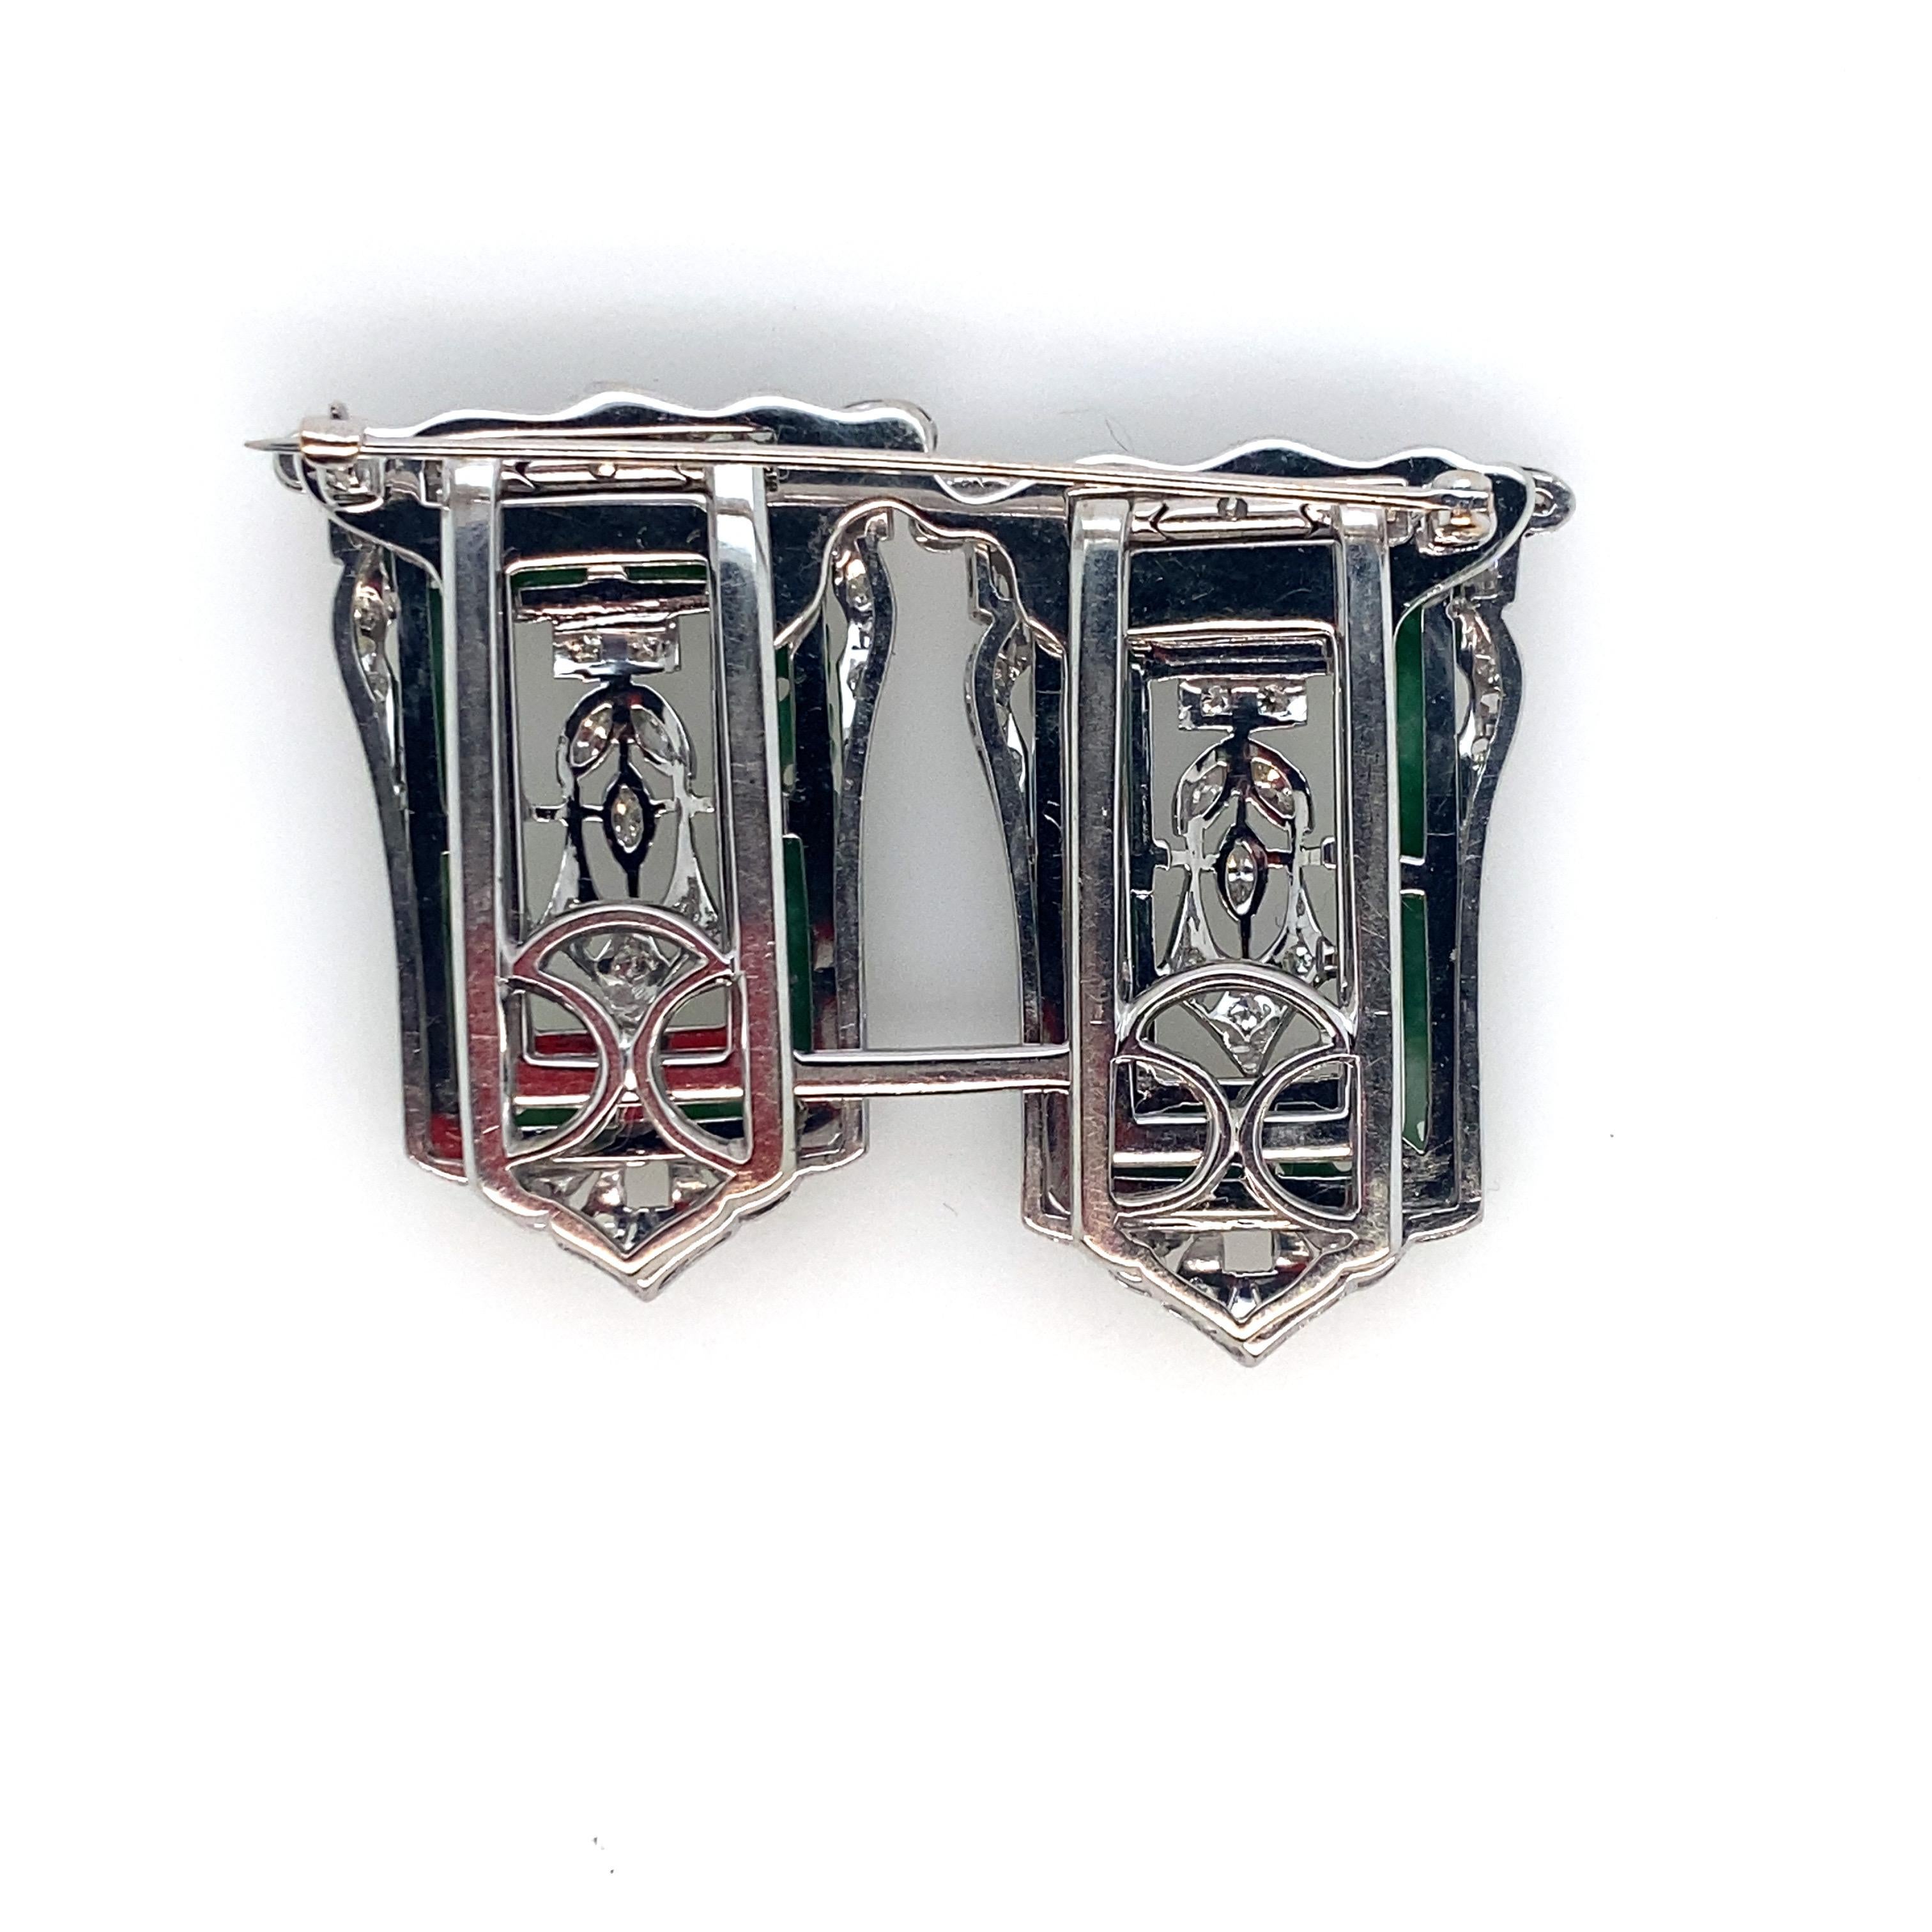 Platinum Vintage Art Deco Diamond and Jade Duette Brooch.  Circa 1940's.  From the Estate of New York CPA, Alfred W. Miles.  He was chairman of the Hoving Corporation, on the board of Tiffany's and Bonwit Teller Specialty stores.  This beaultiful